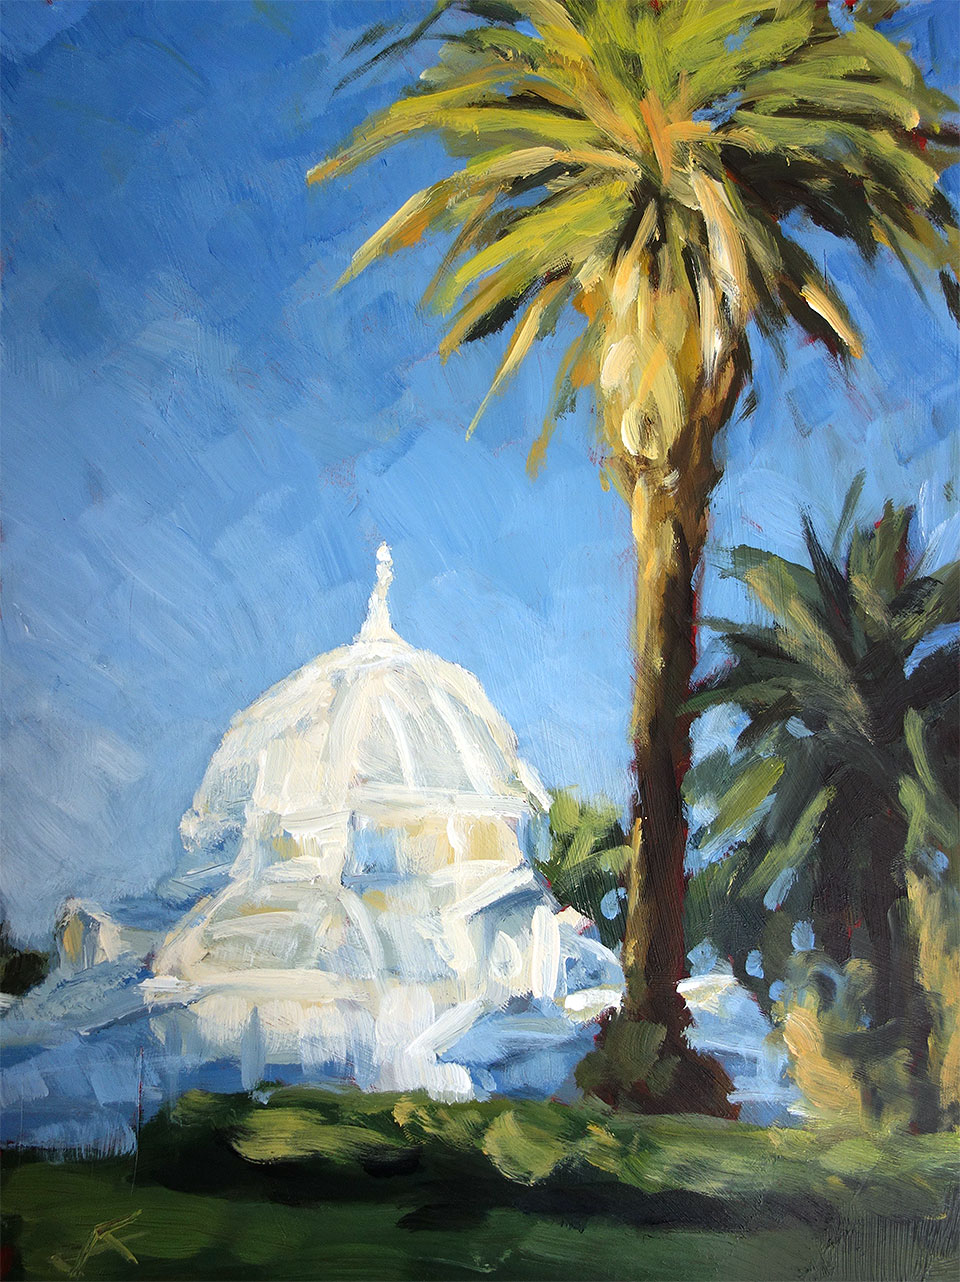 j farnsworth painting of the conservatory of flowers